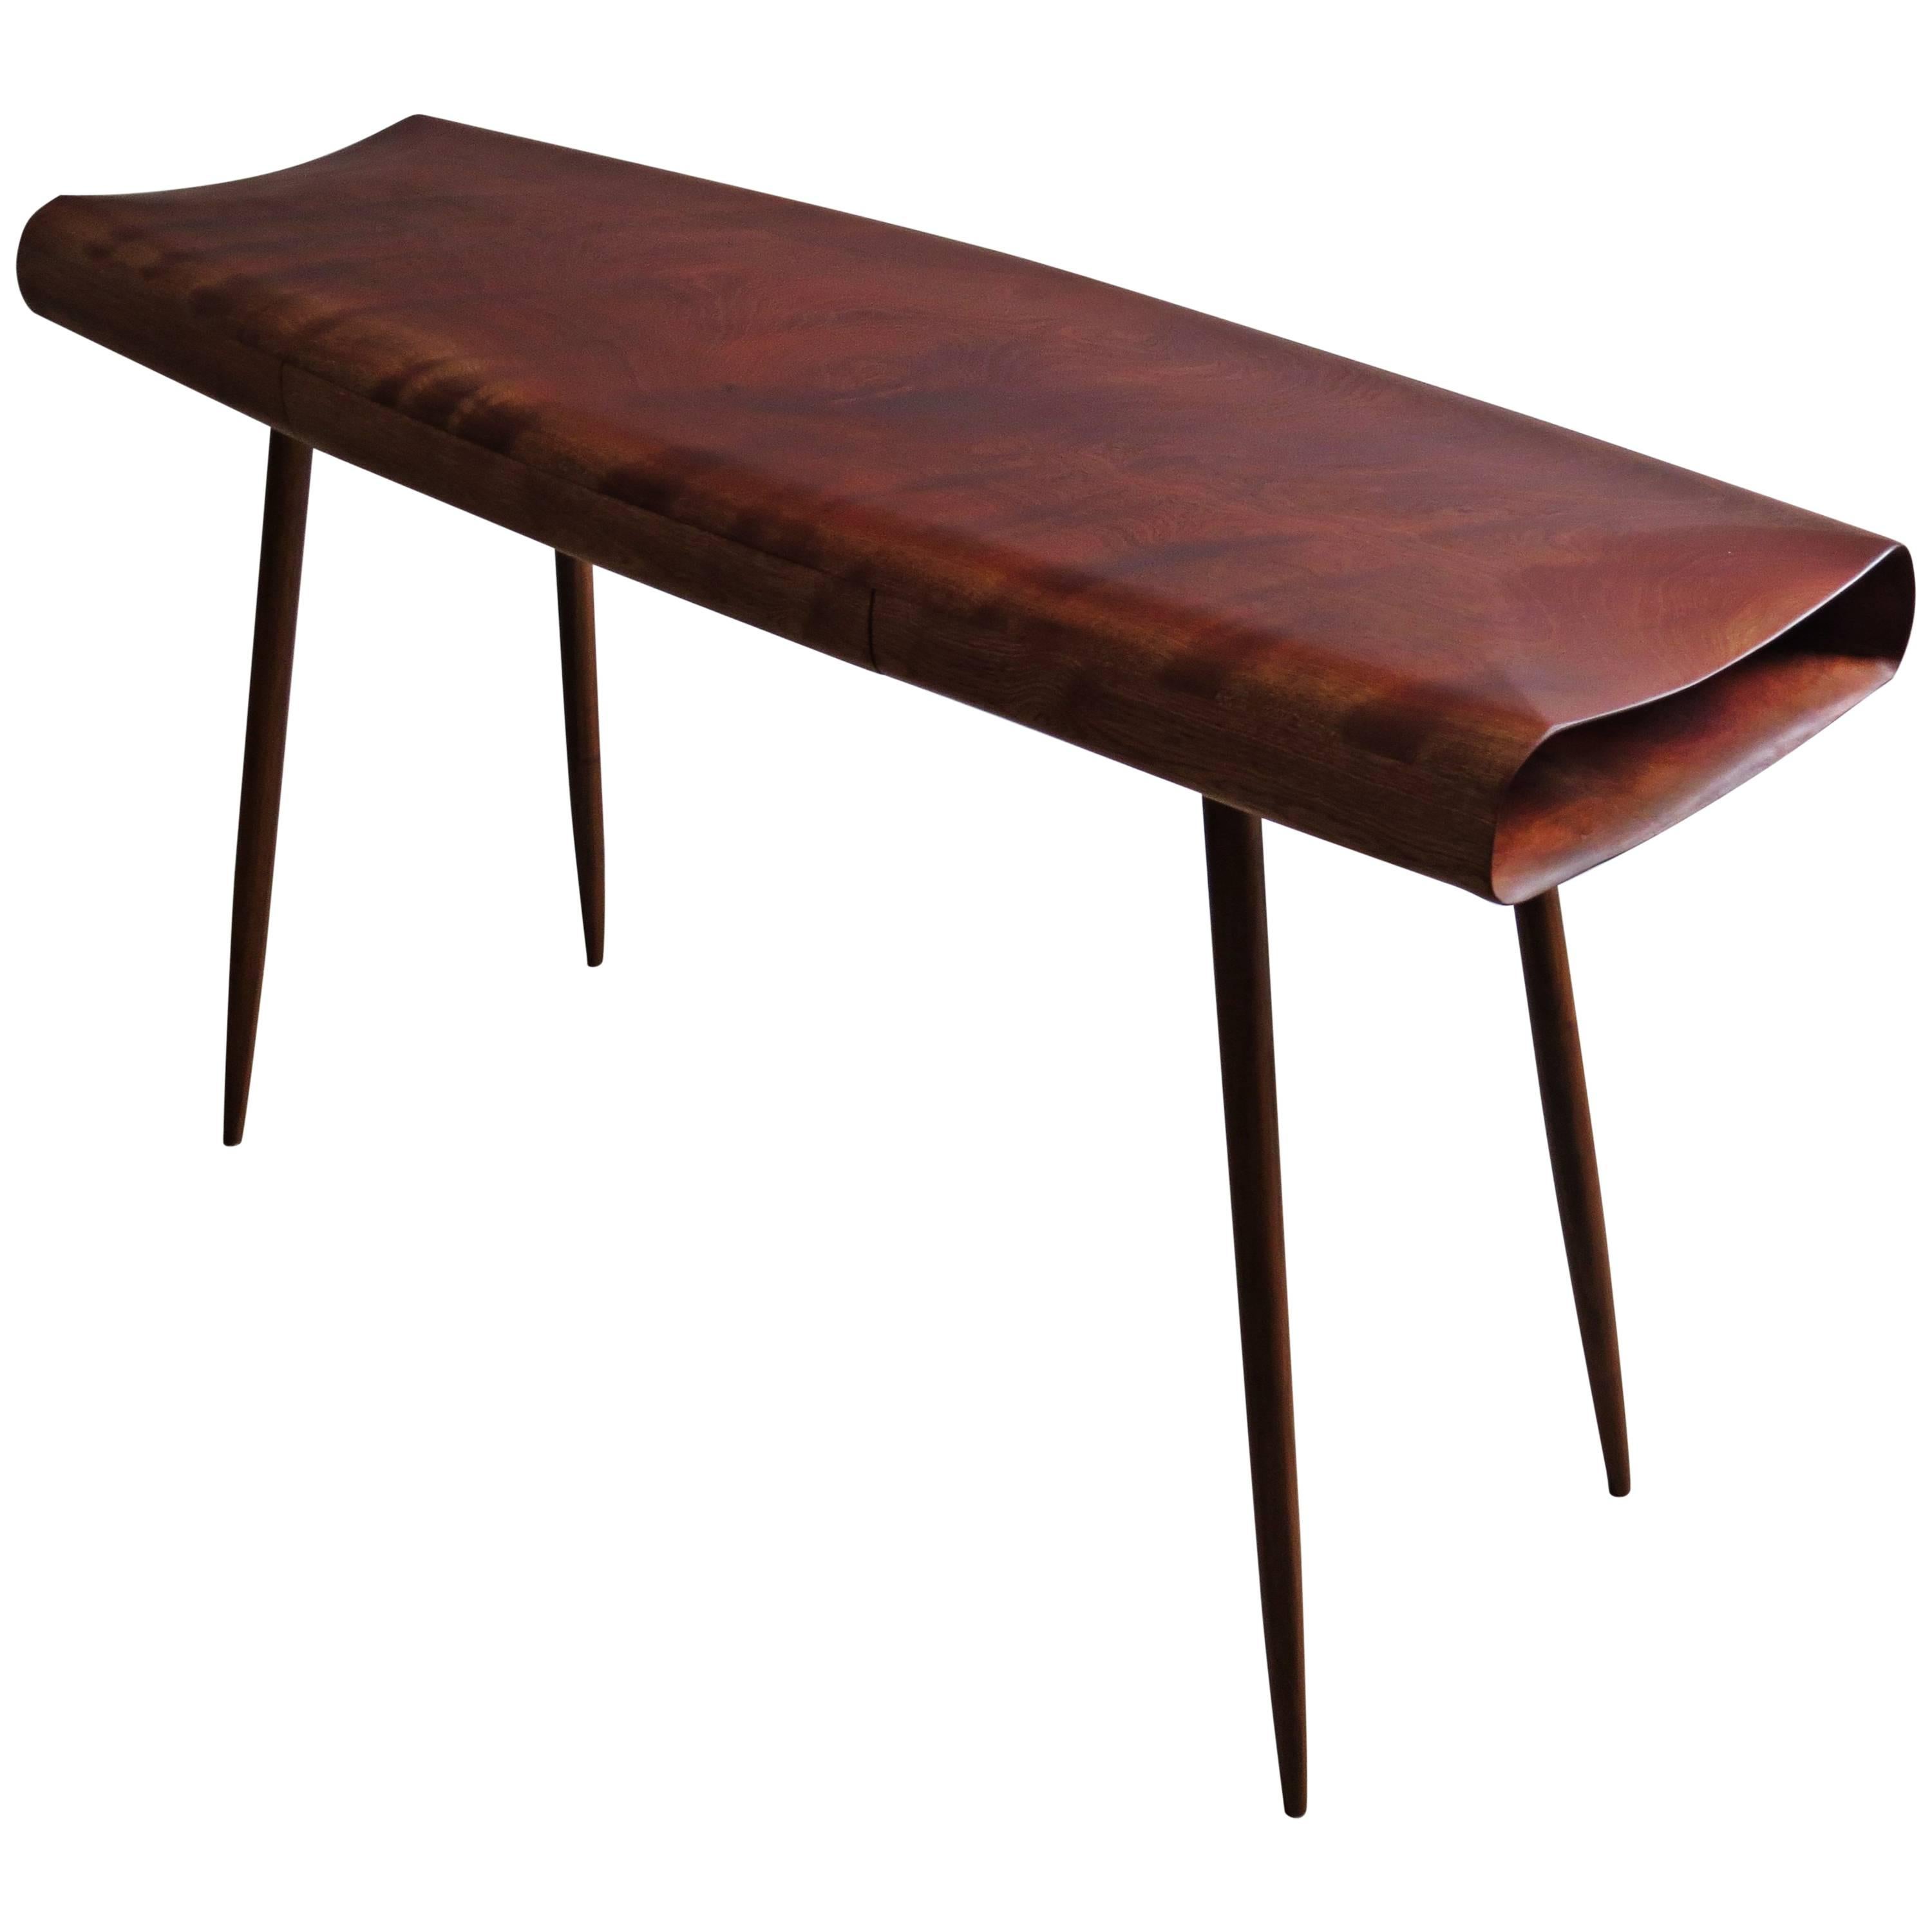 Desk or Console Handmade in Organic Design solid wood For Sale